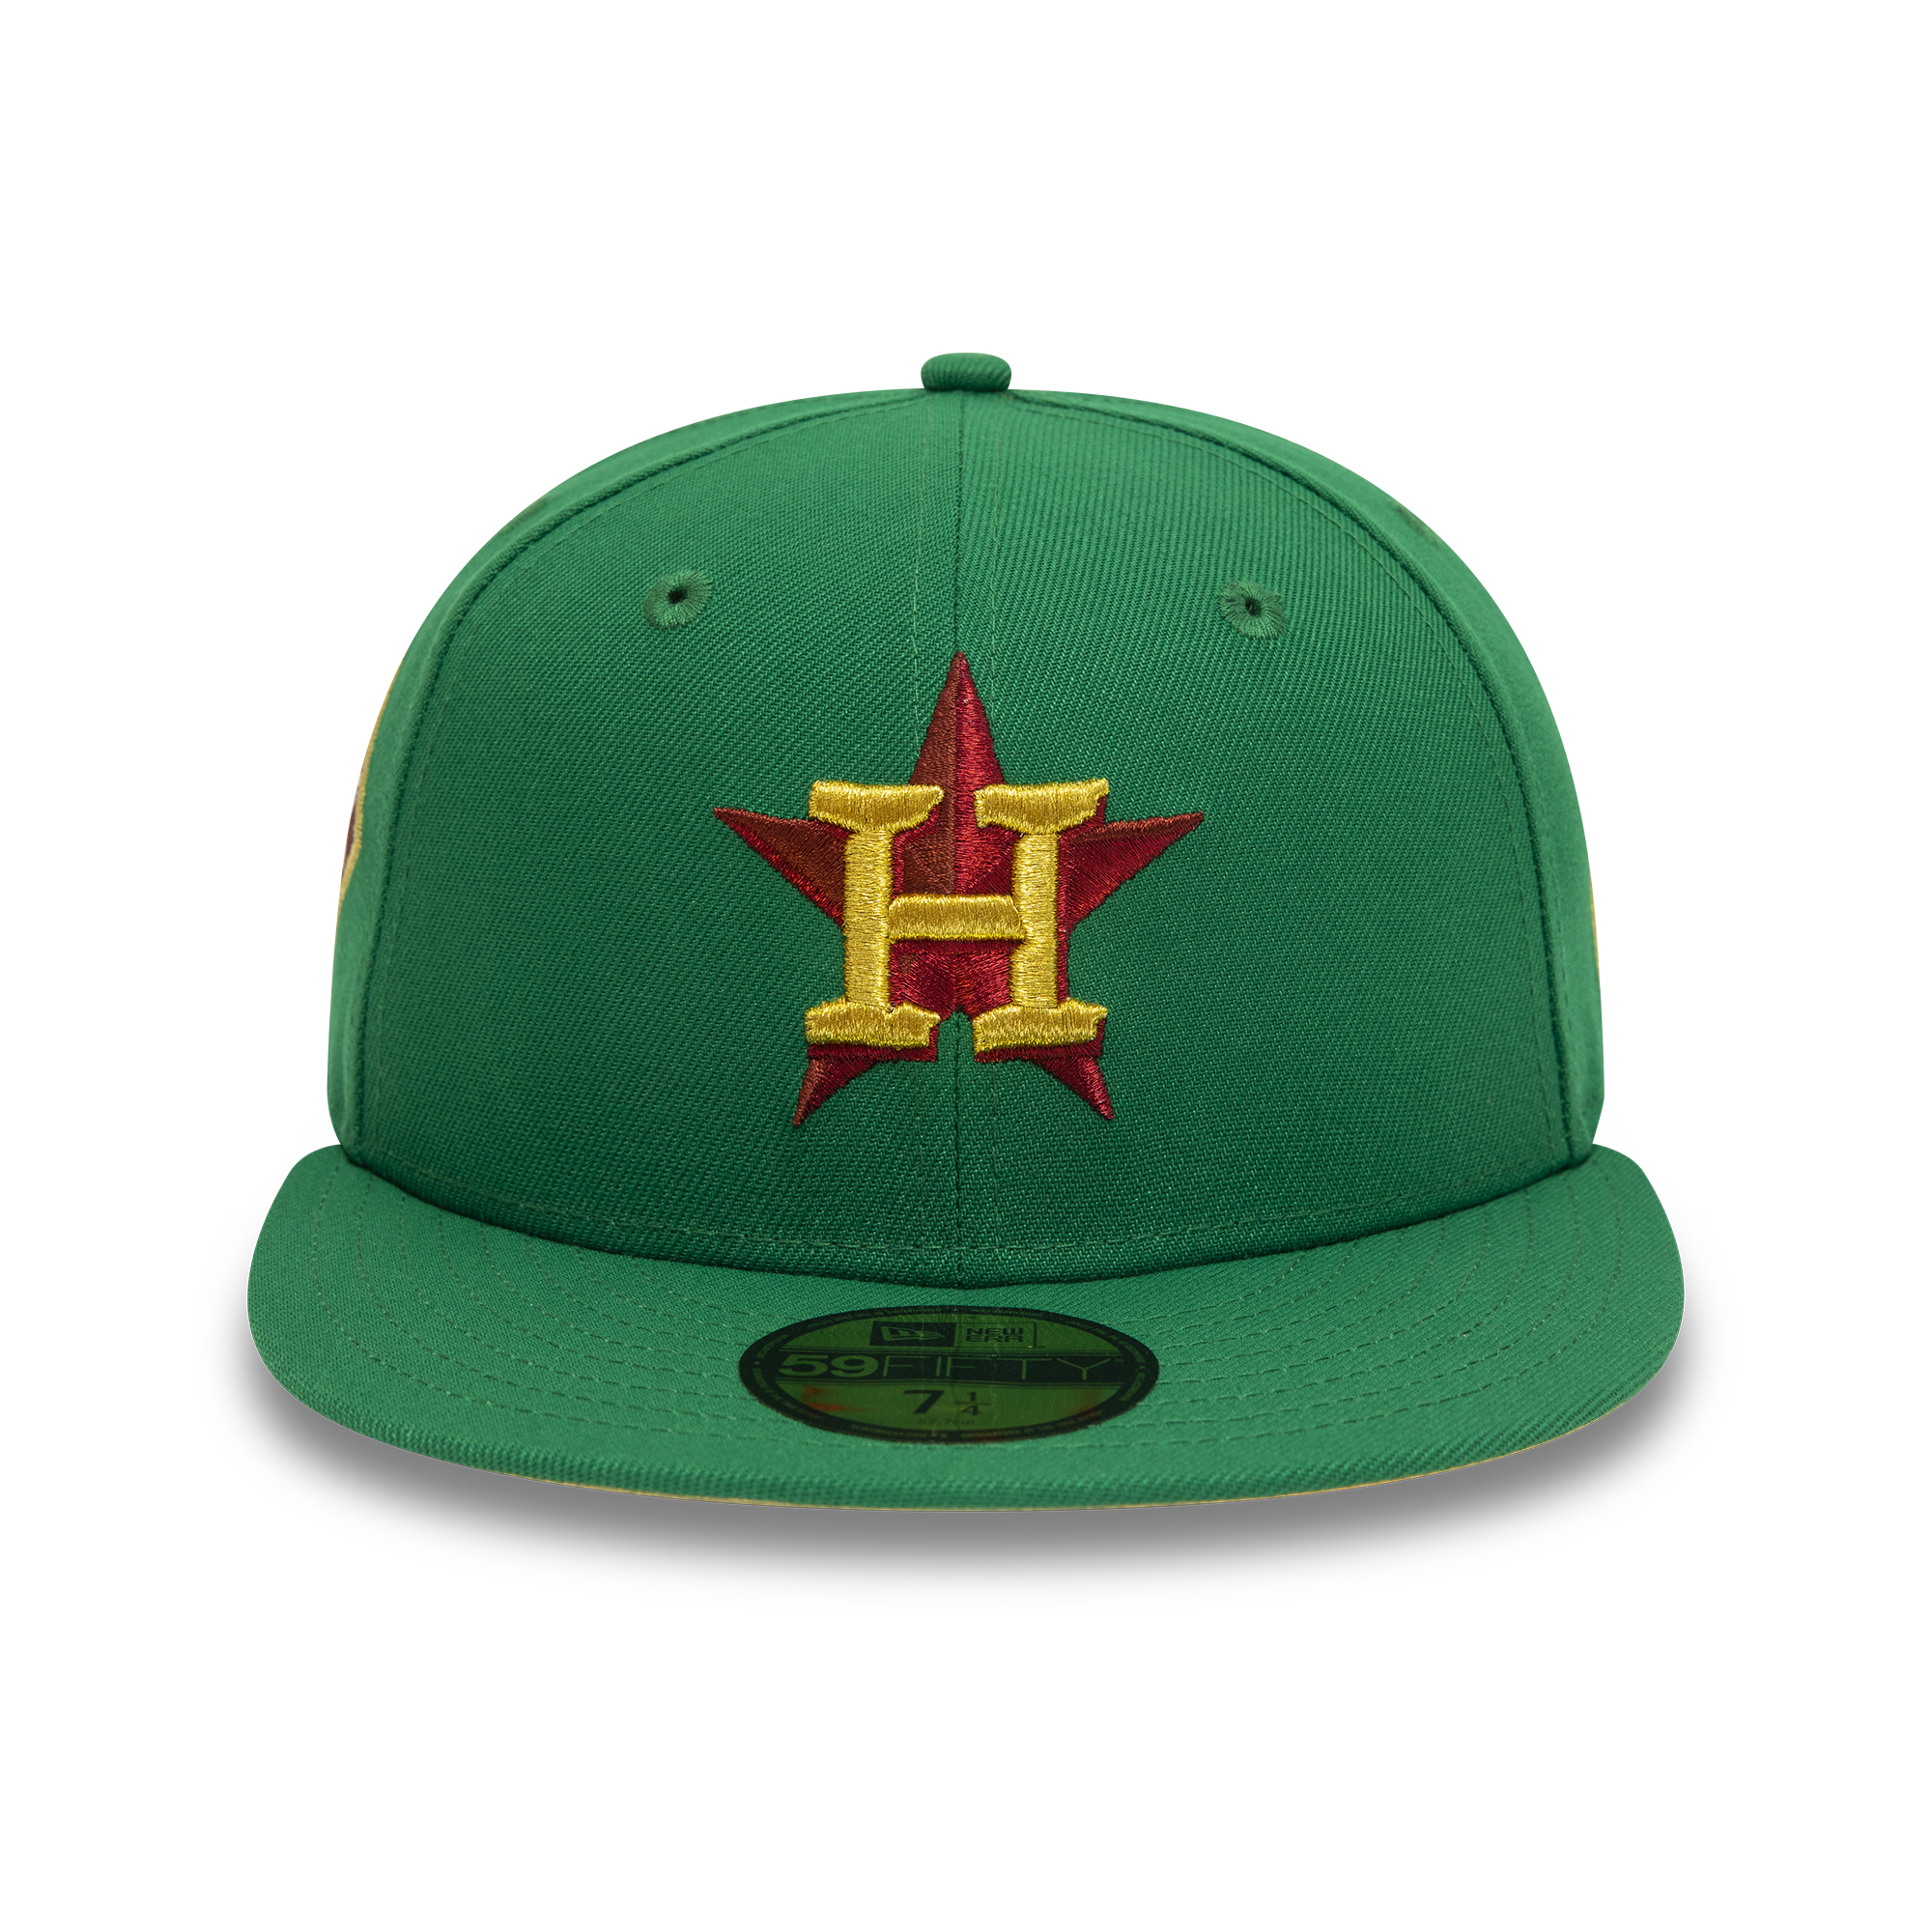 Houston Astros 2017 World Series Green 59FIFTY Fitted Cap